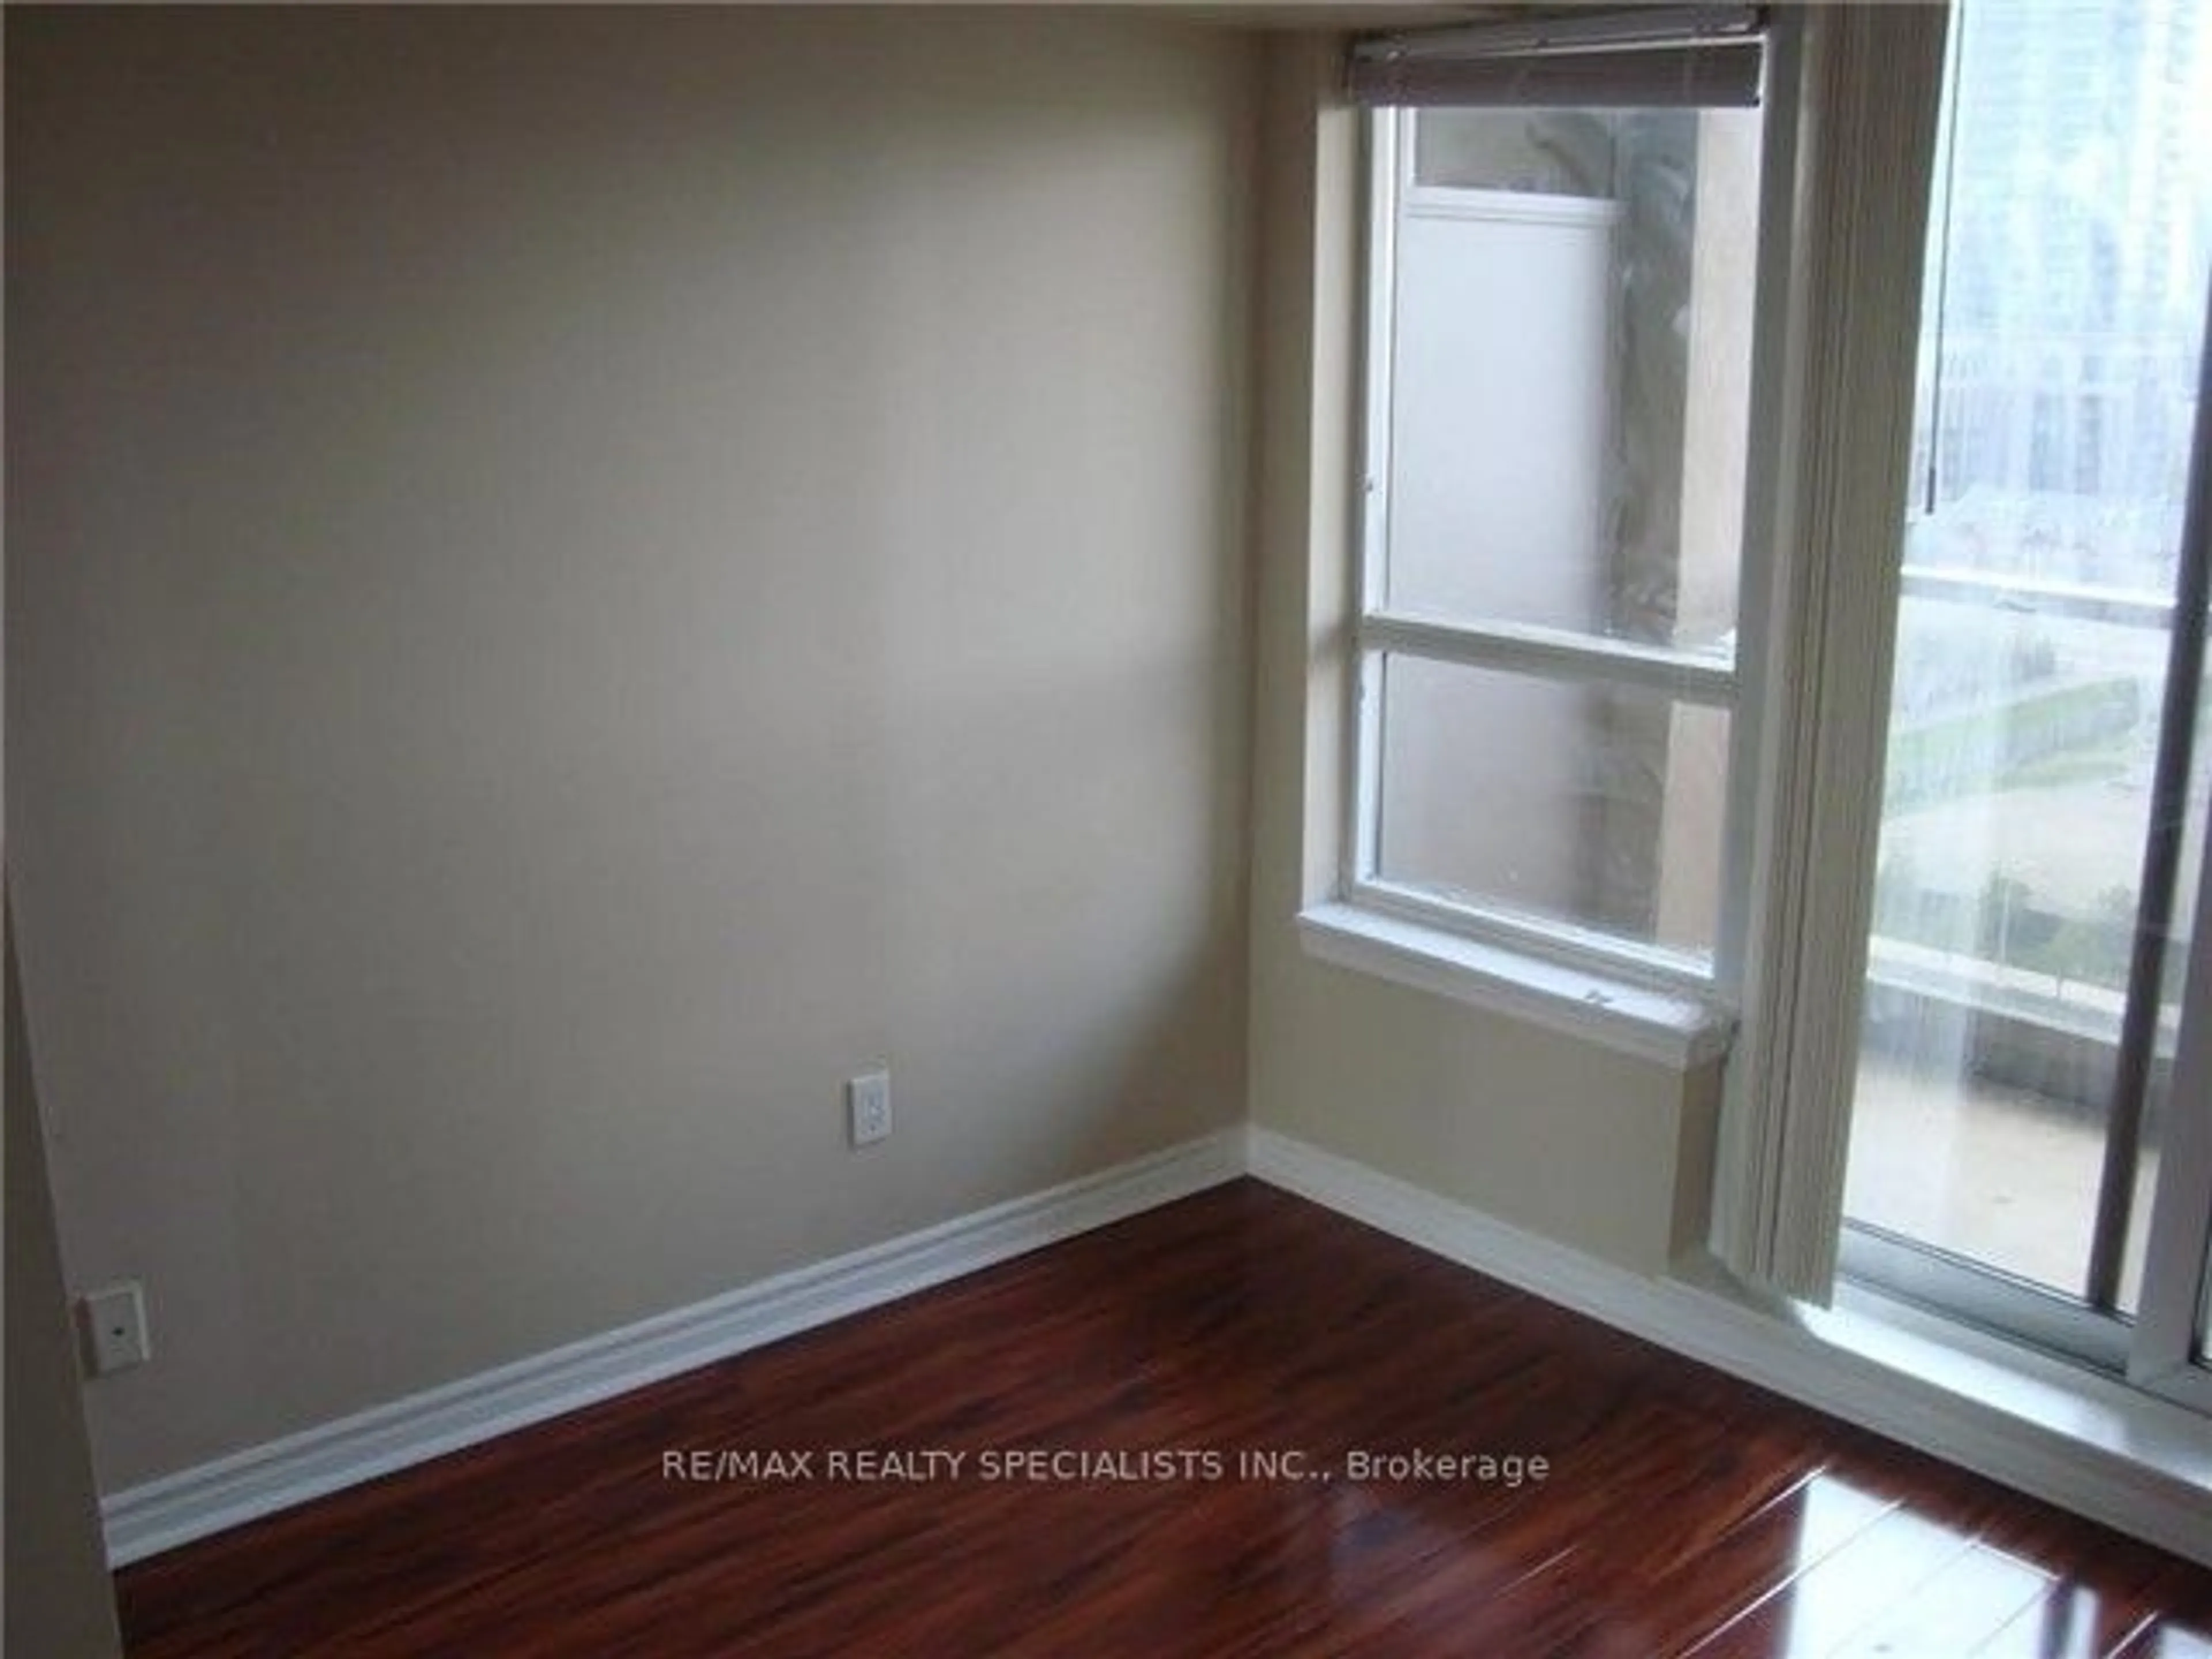 A pic of a room for 4090 Living Arts Dr #1206, Mississauga Ontario L5B 4M8